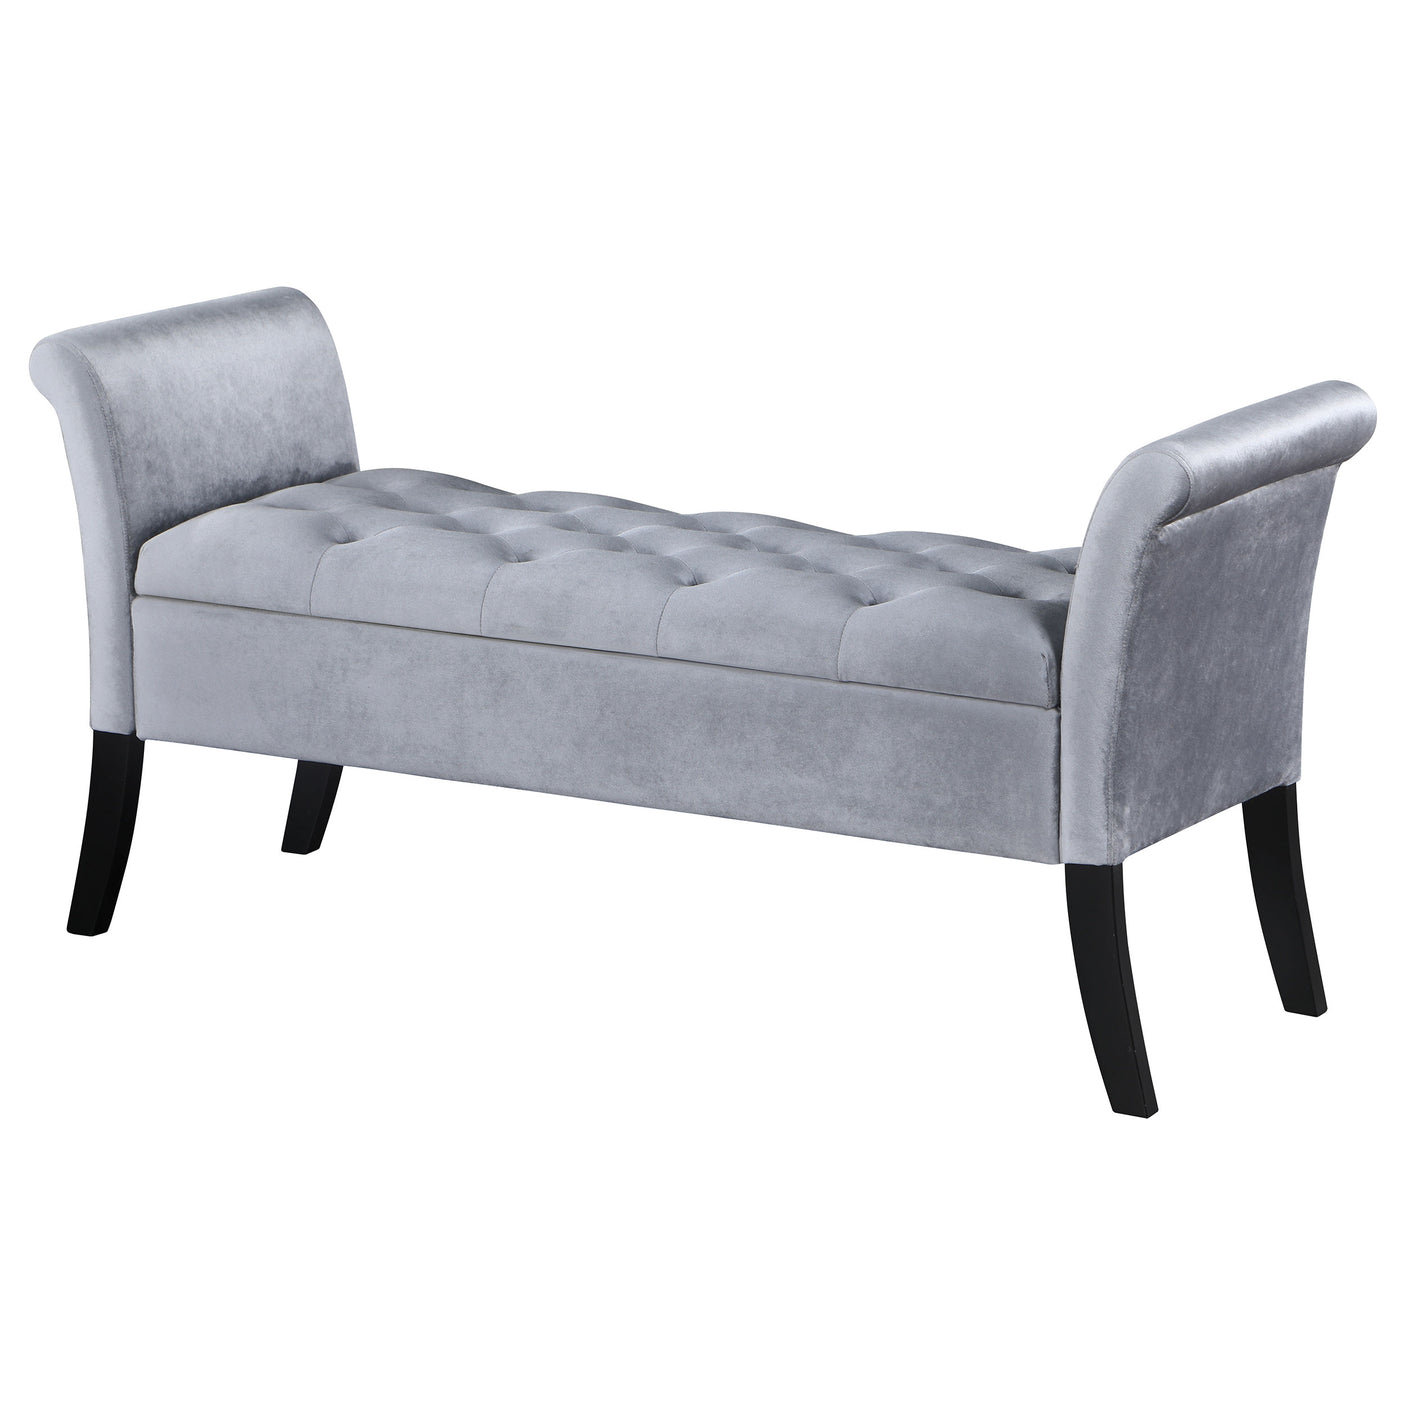 Storage Bench - Farrah Upholstered Rolled Arms Storage Bench Silver and Black